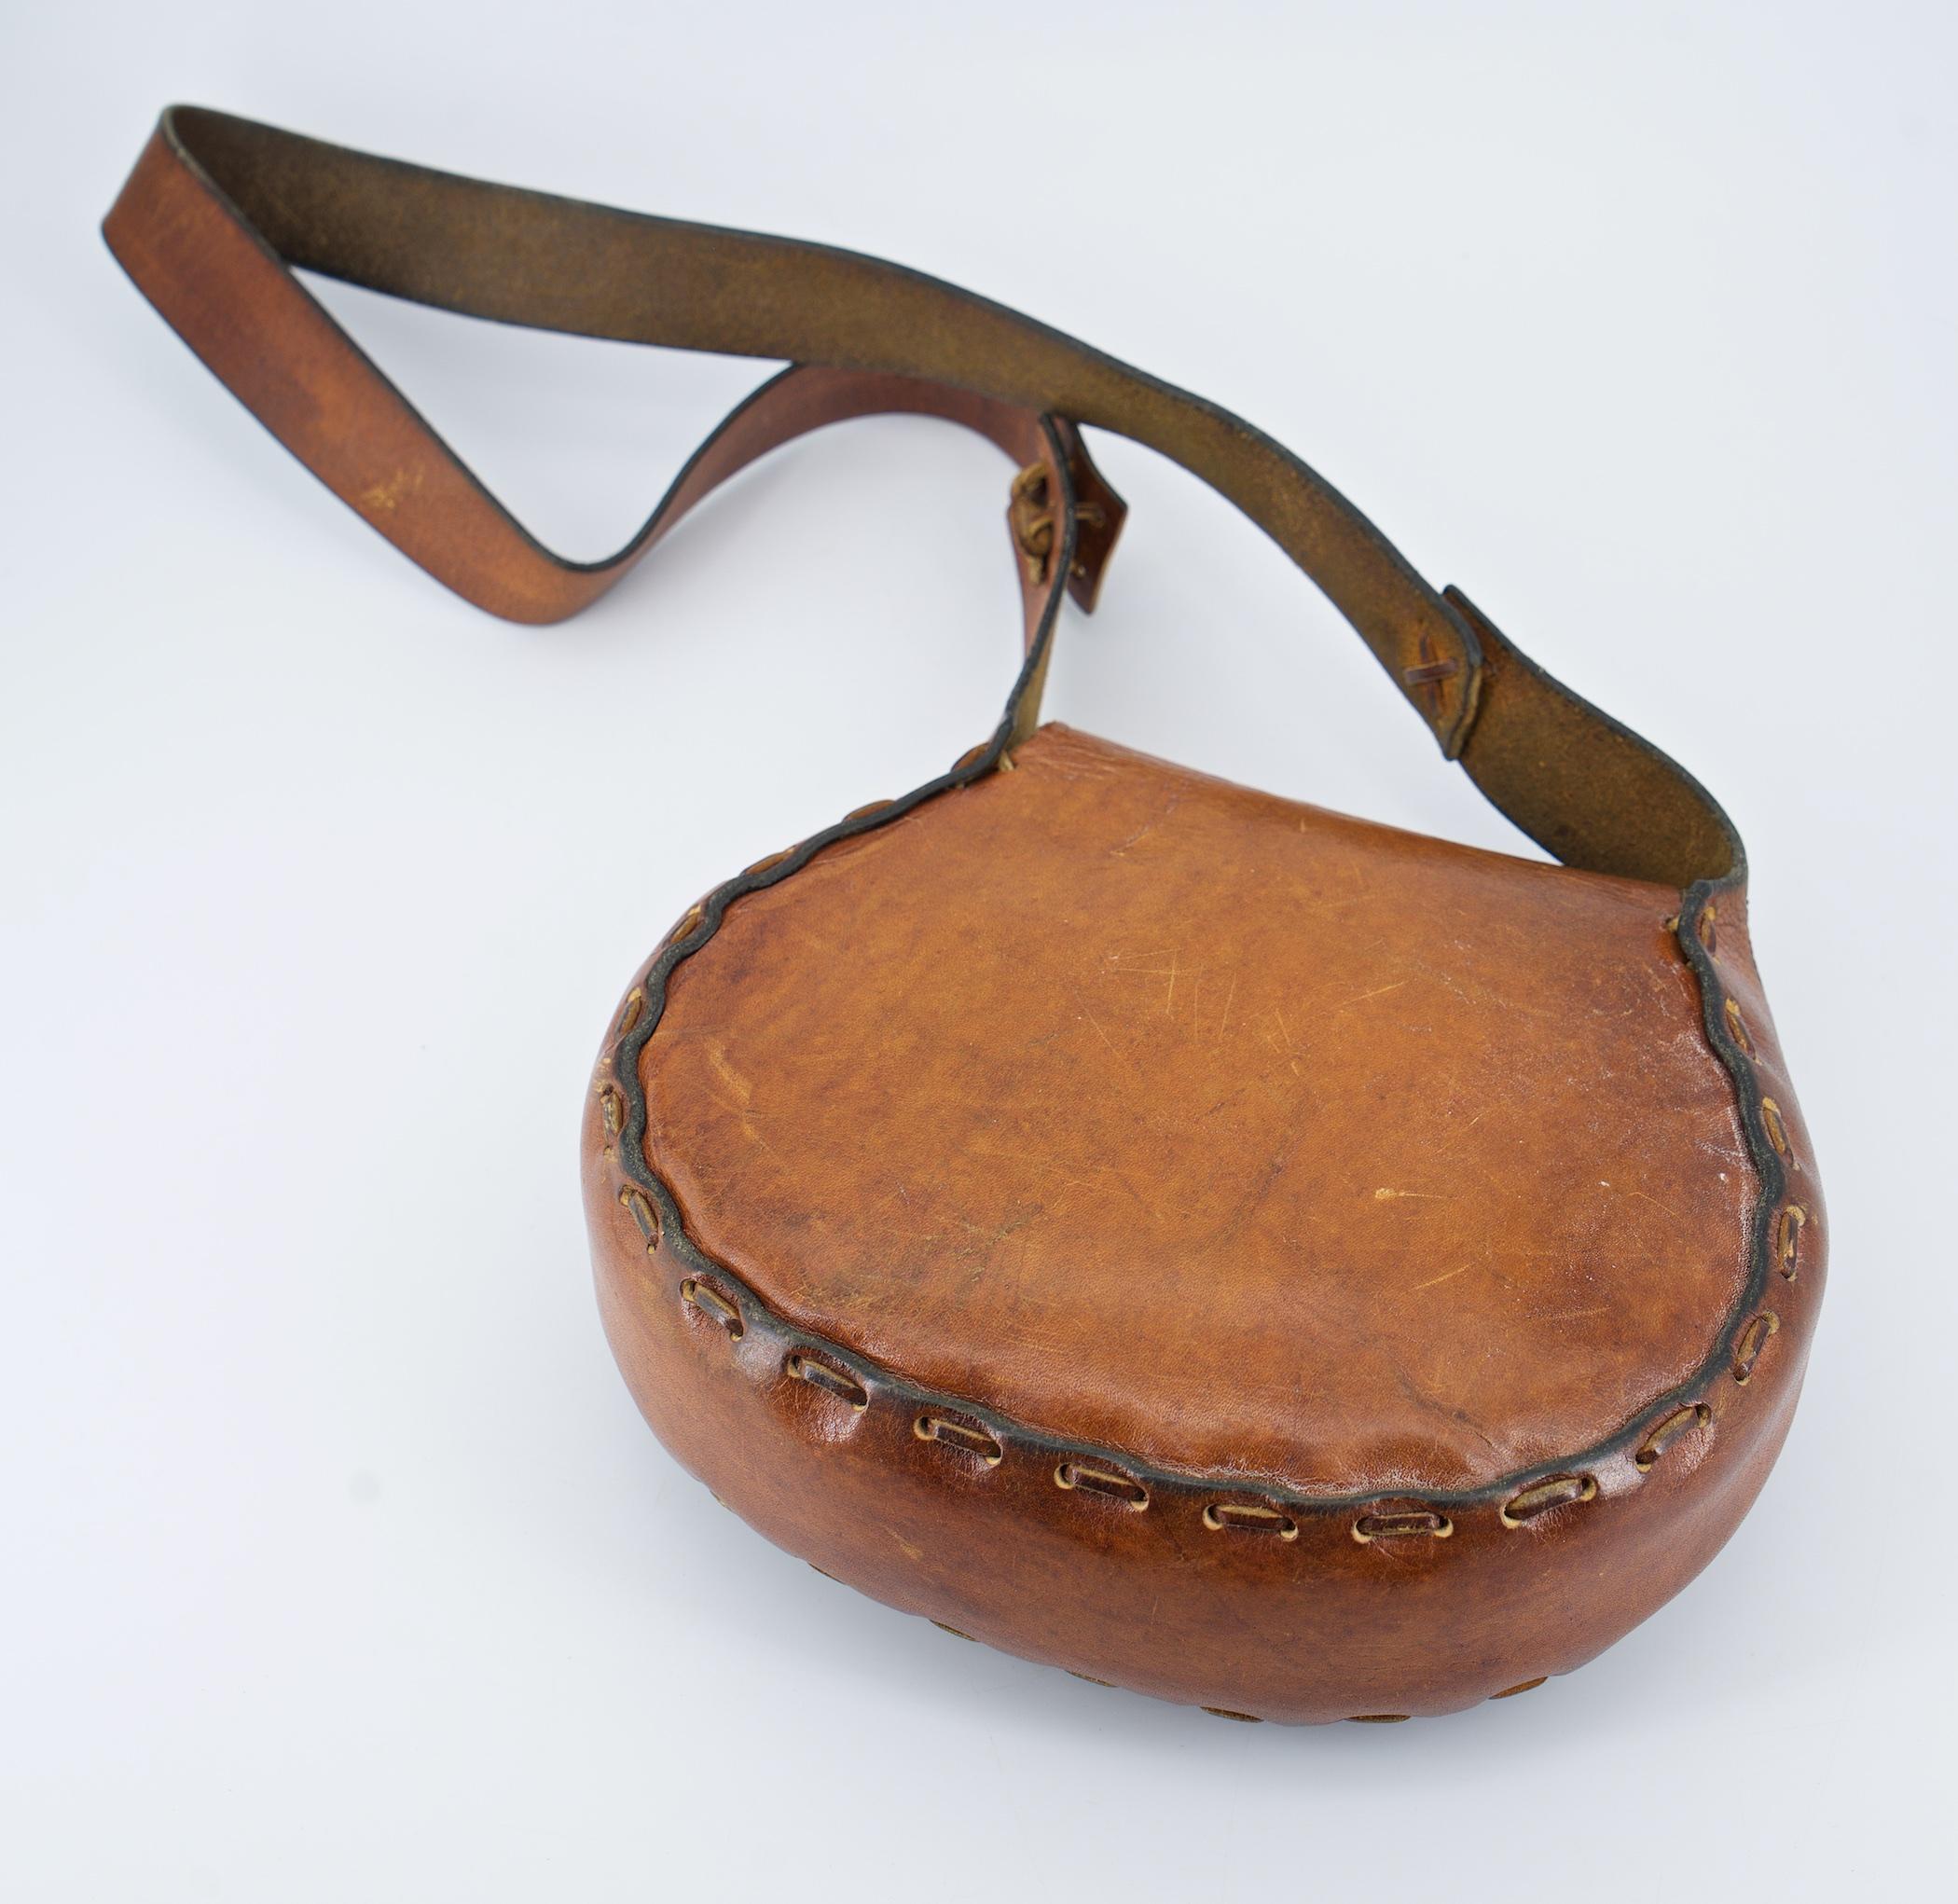 1970s Steven Burr Buckled Leather California Hippie Hip Purse Bag In Fair Condition For Sale In Hyattsville, MD